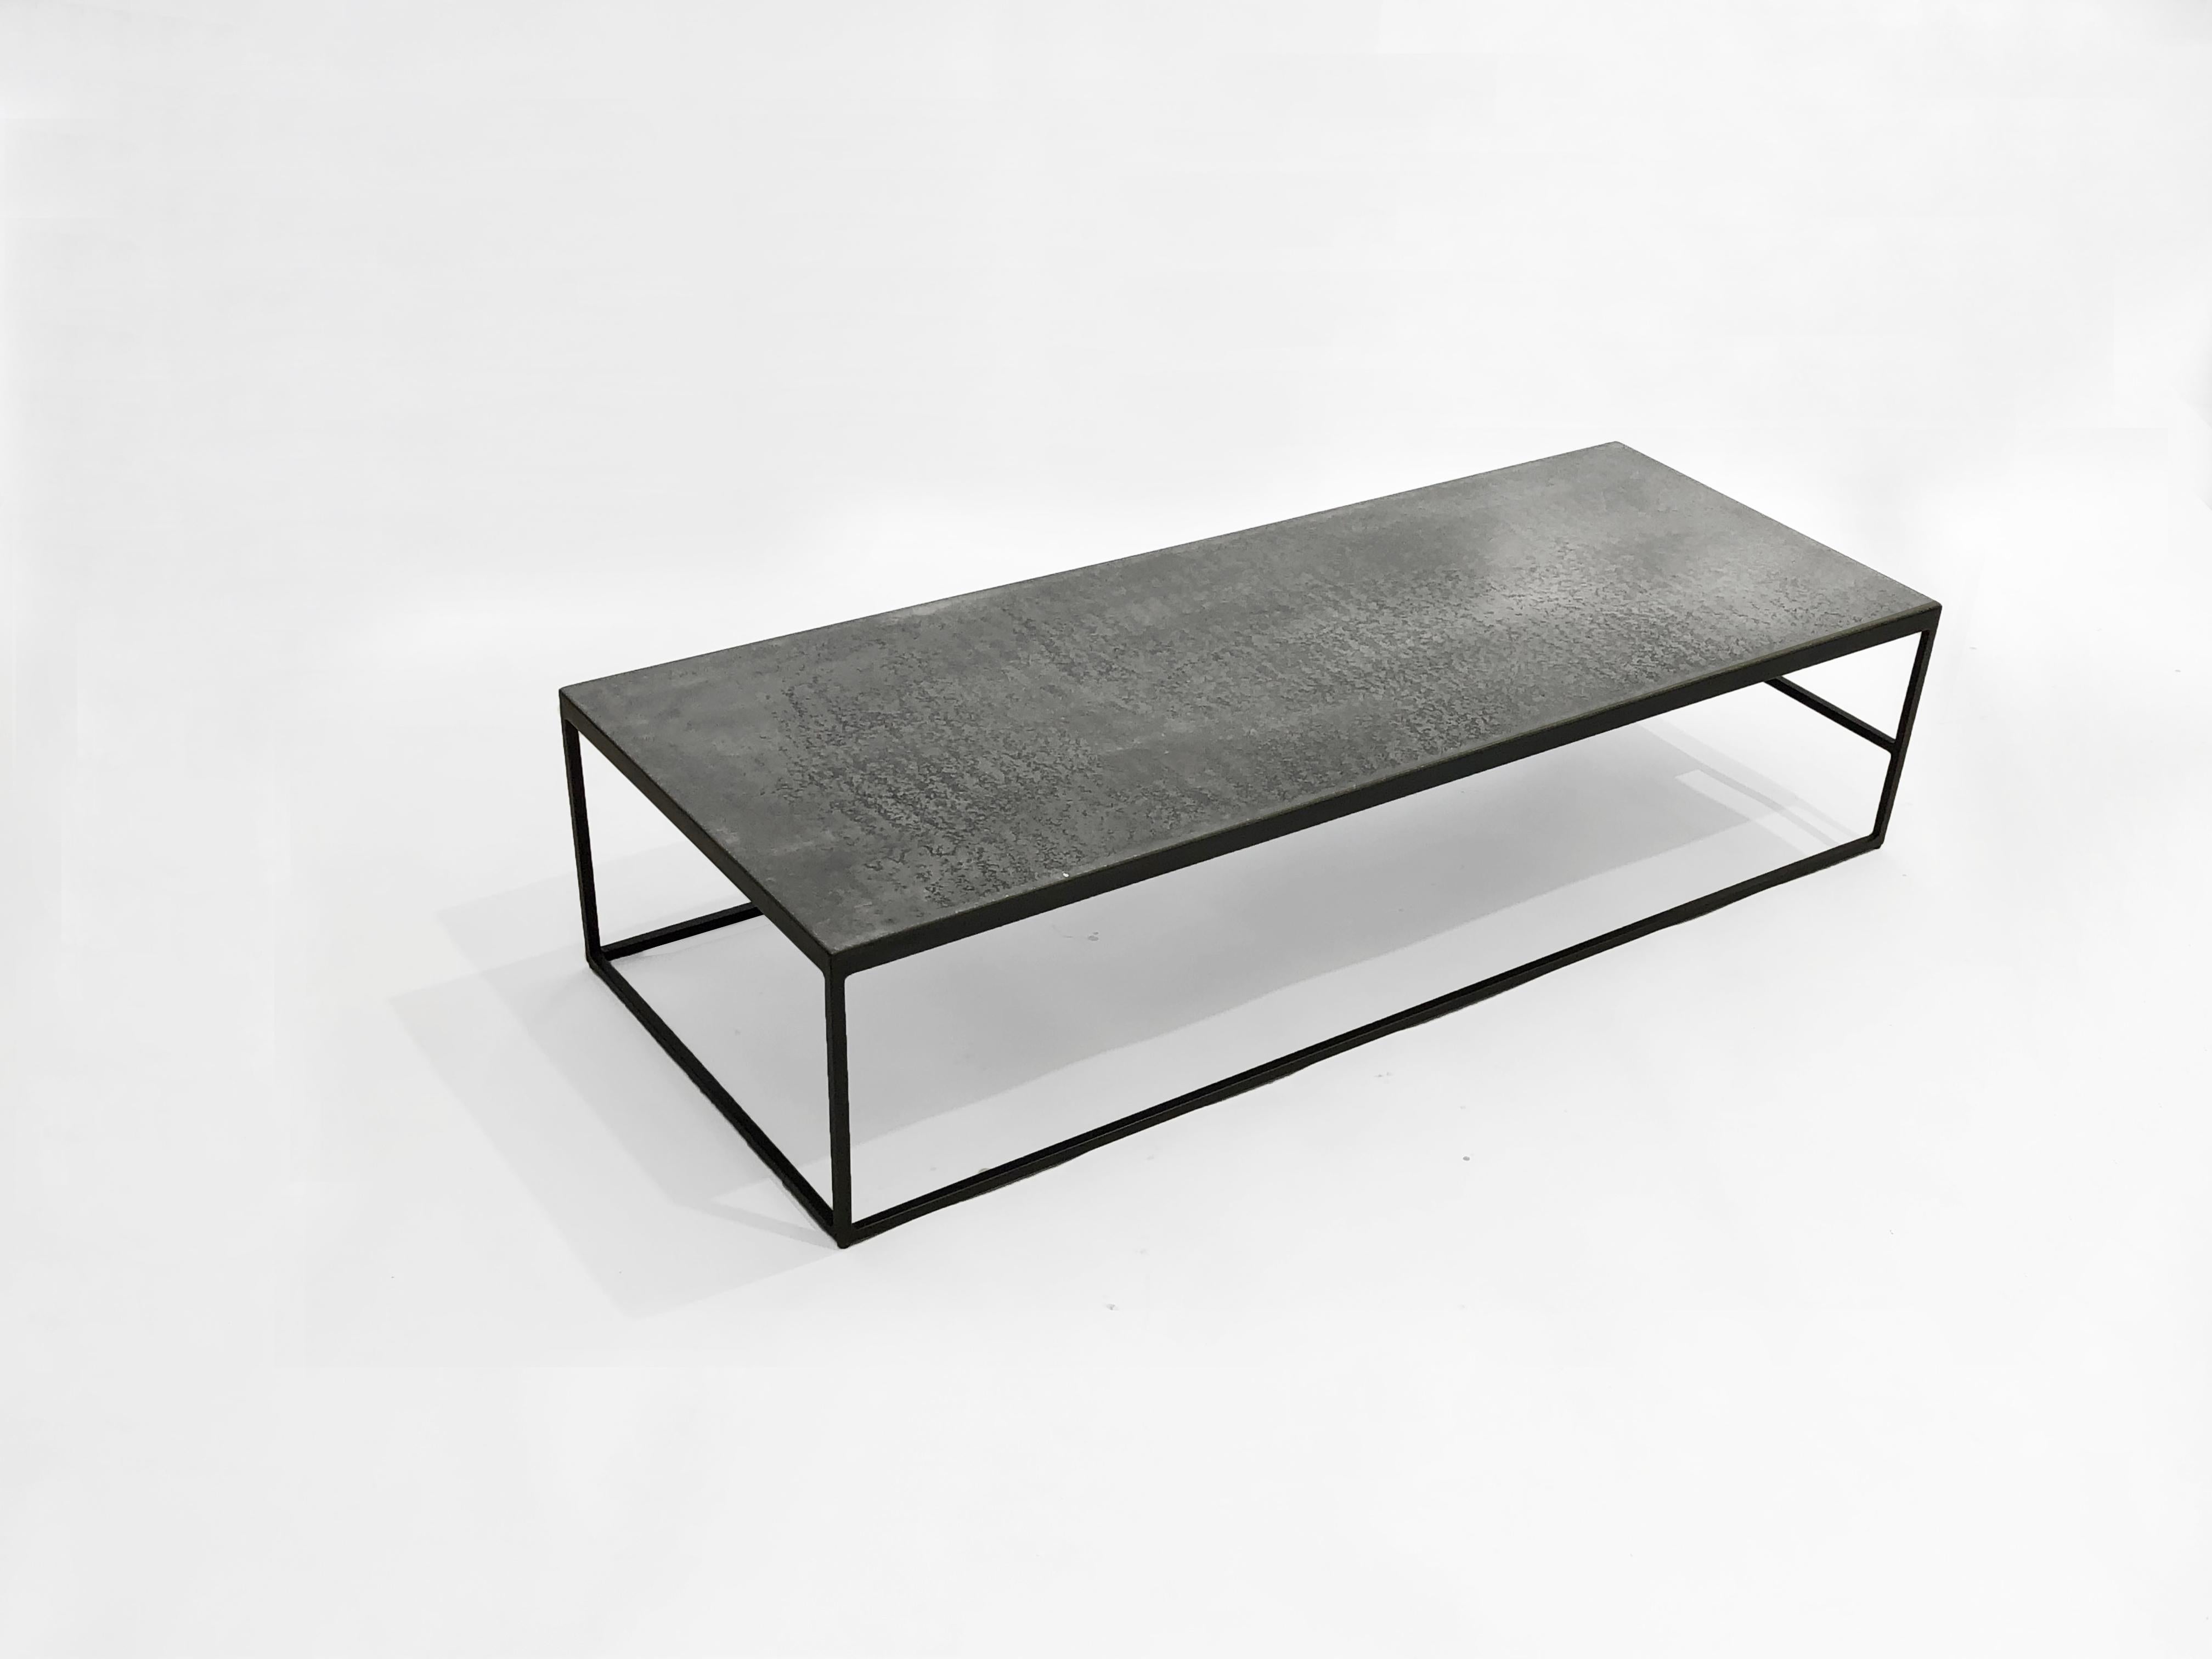 Blackened steel and pigmented concrete are the buildings blocks of the Gray Bird coffee table, but the sophisticated design terminology is what sets it apart. Elevating what are typically considered heavy industrial materials into something